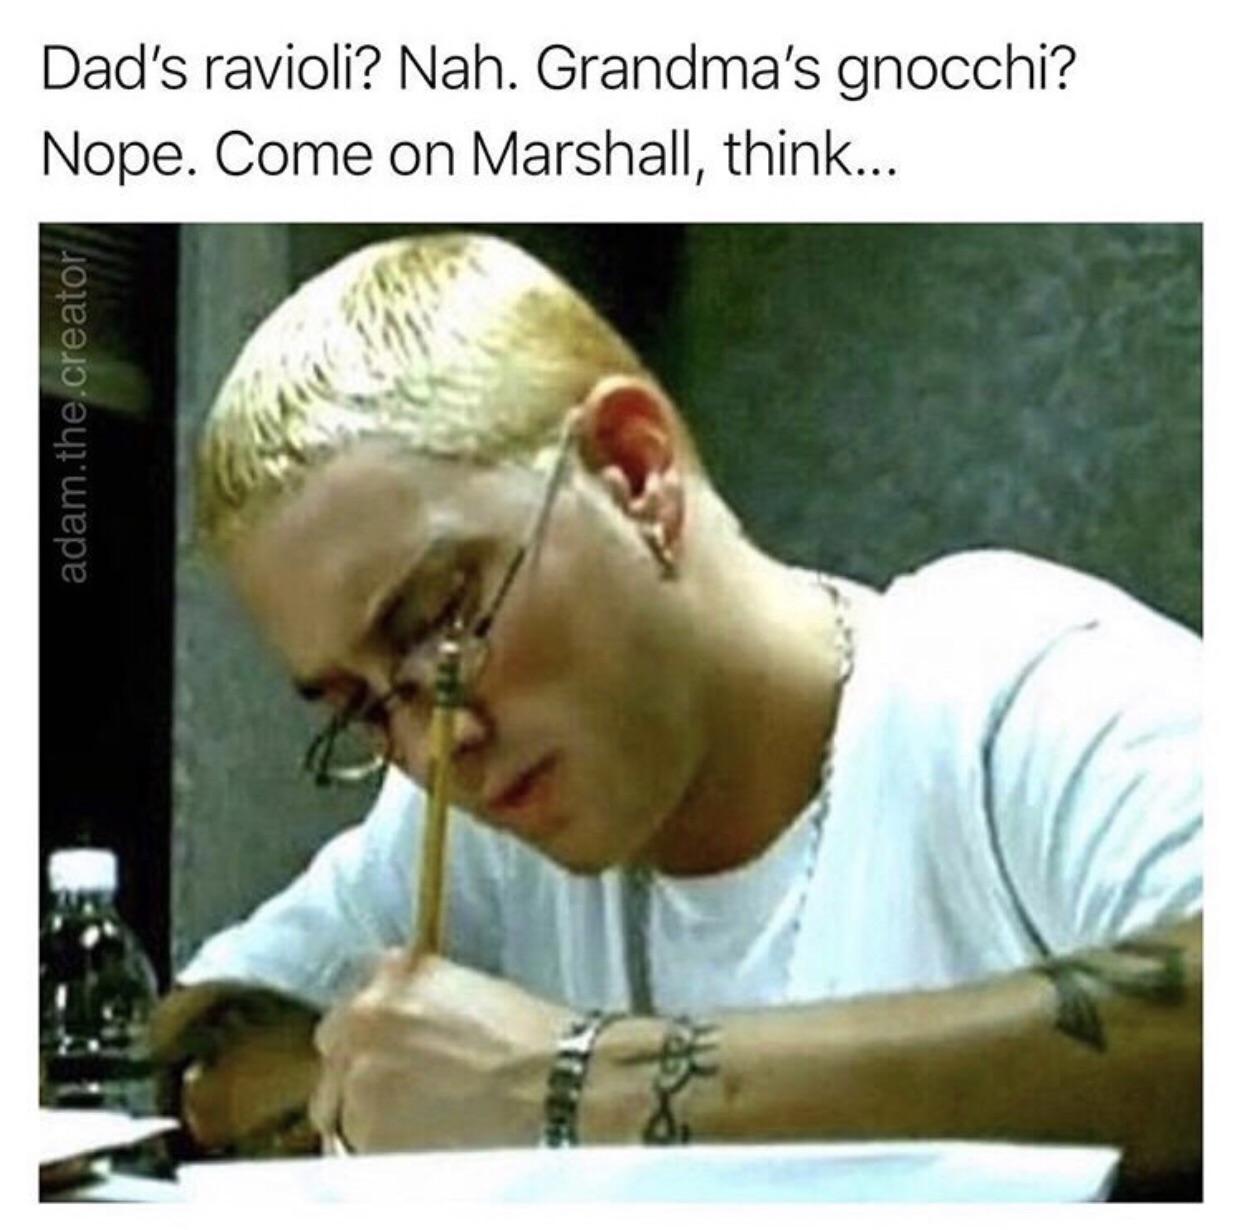 really funny pictures - Dad's ravioli? Nah. Grandma's gnocchi? Nope. Come on Marshall, think... adam.the.creator